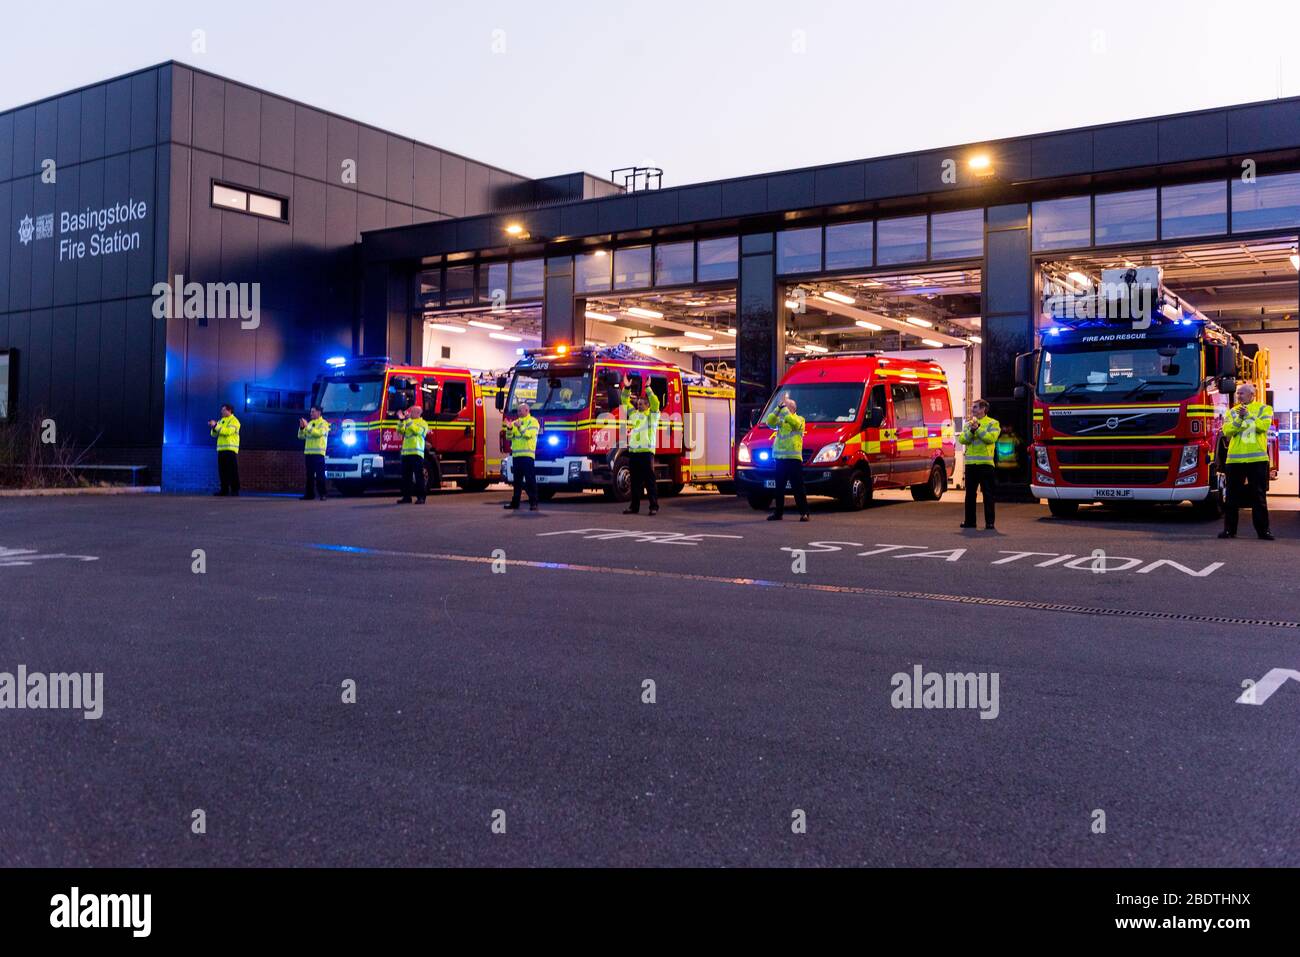 fire service paying tribute to NHS by clapping 8pm in Hampshire Basingstoke firemen clapping Stock Photo